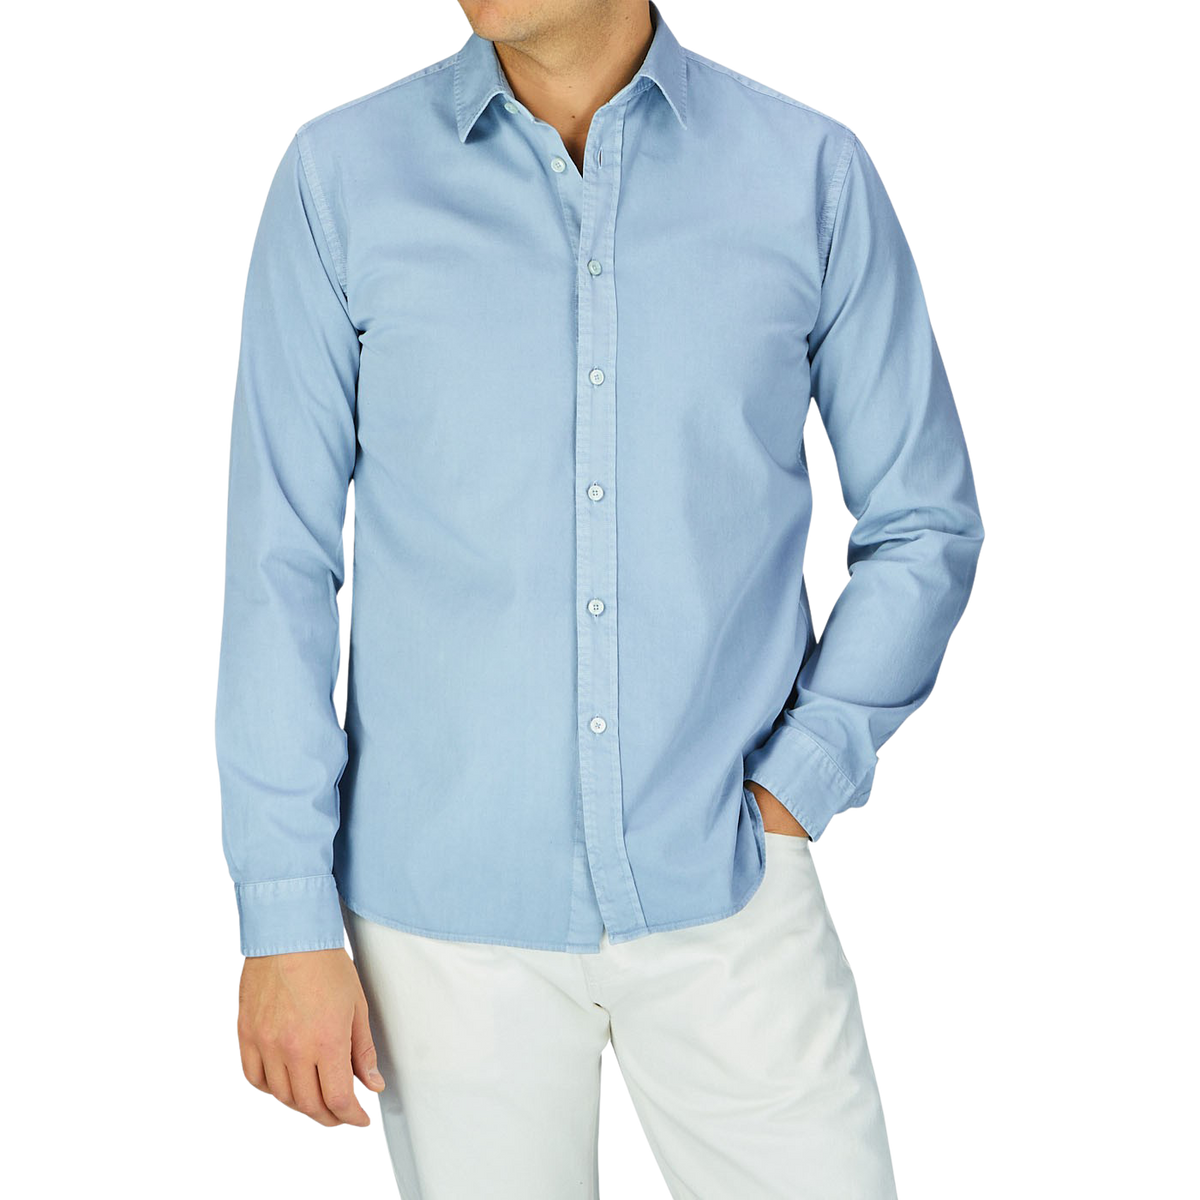 A person wearing a Xacus Light Blue Washed Cotton Twill Legacy Shirt and white pants.